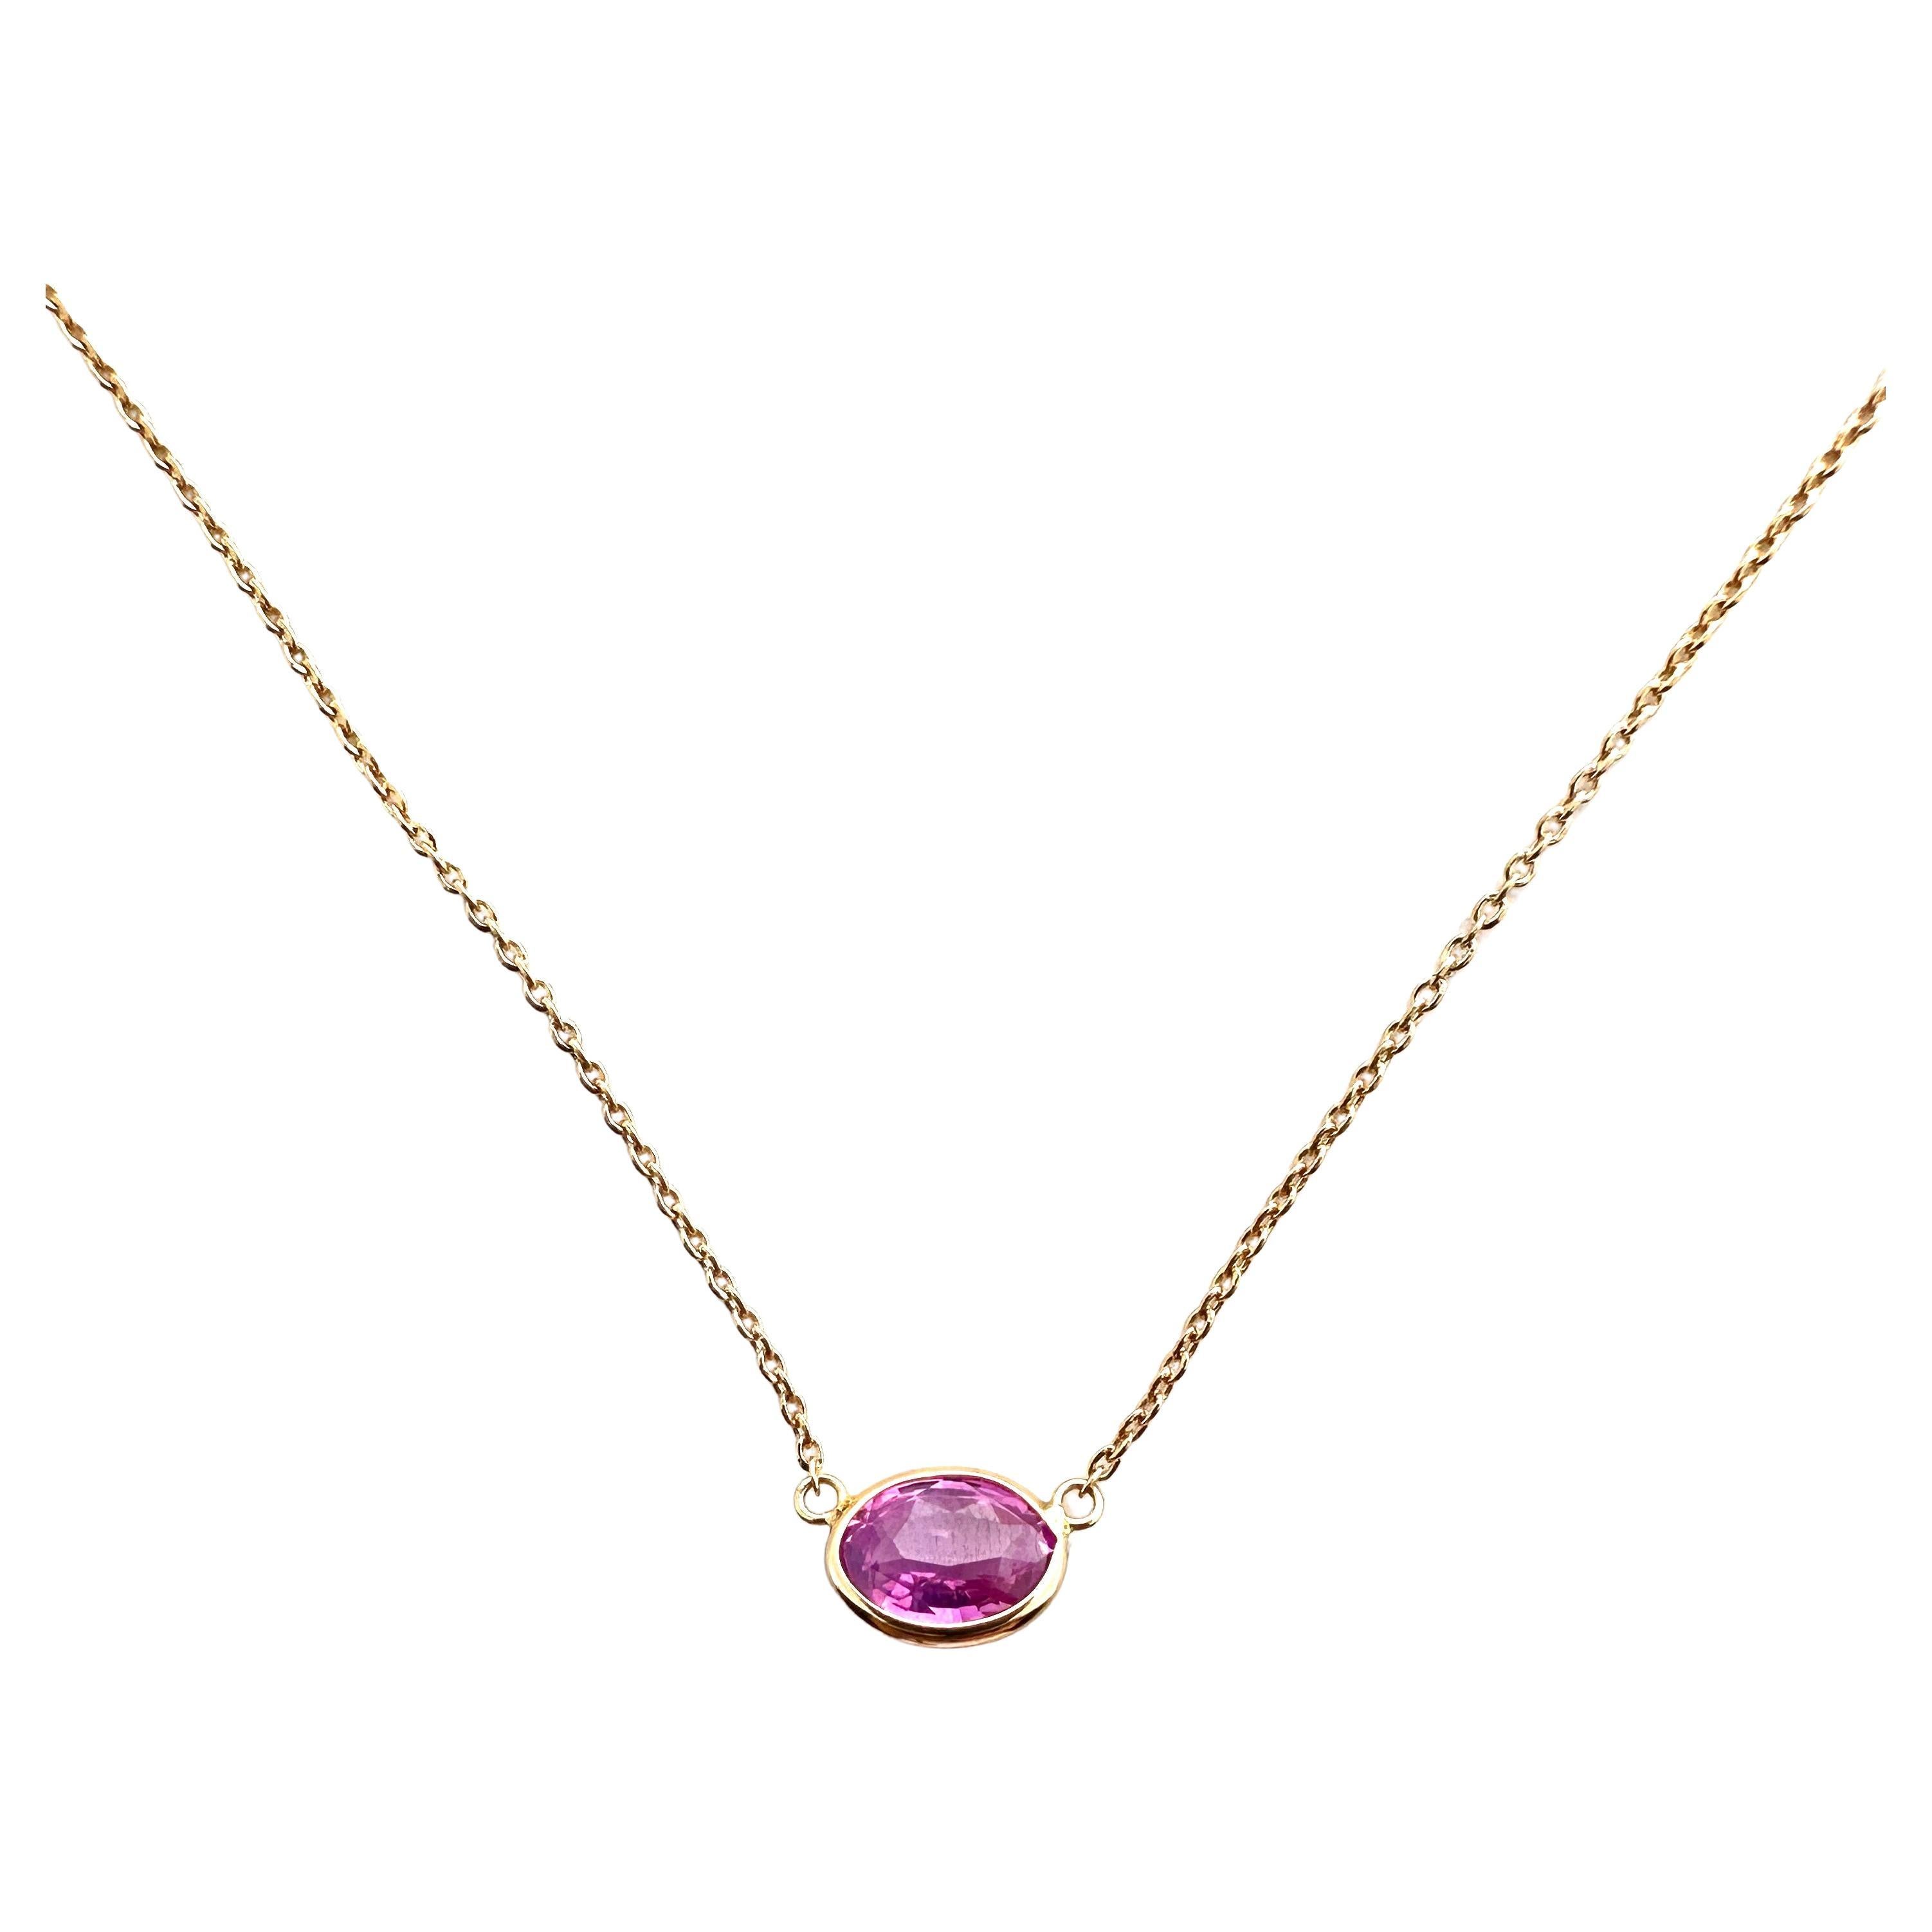 1.74 Ct Weight Certified Pink Sapphire Oval Cut Solitaire Necklace In 14K RG